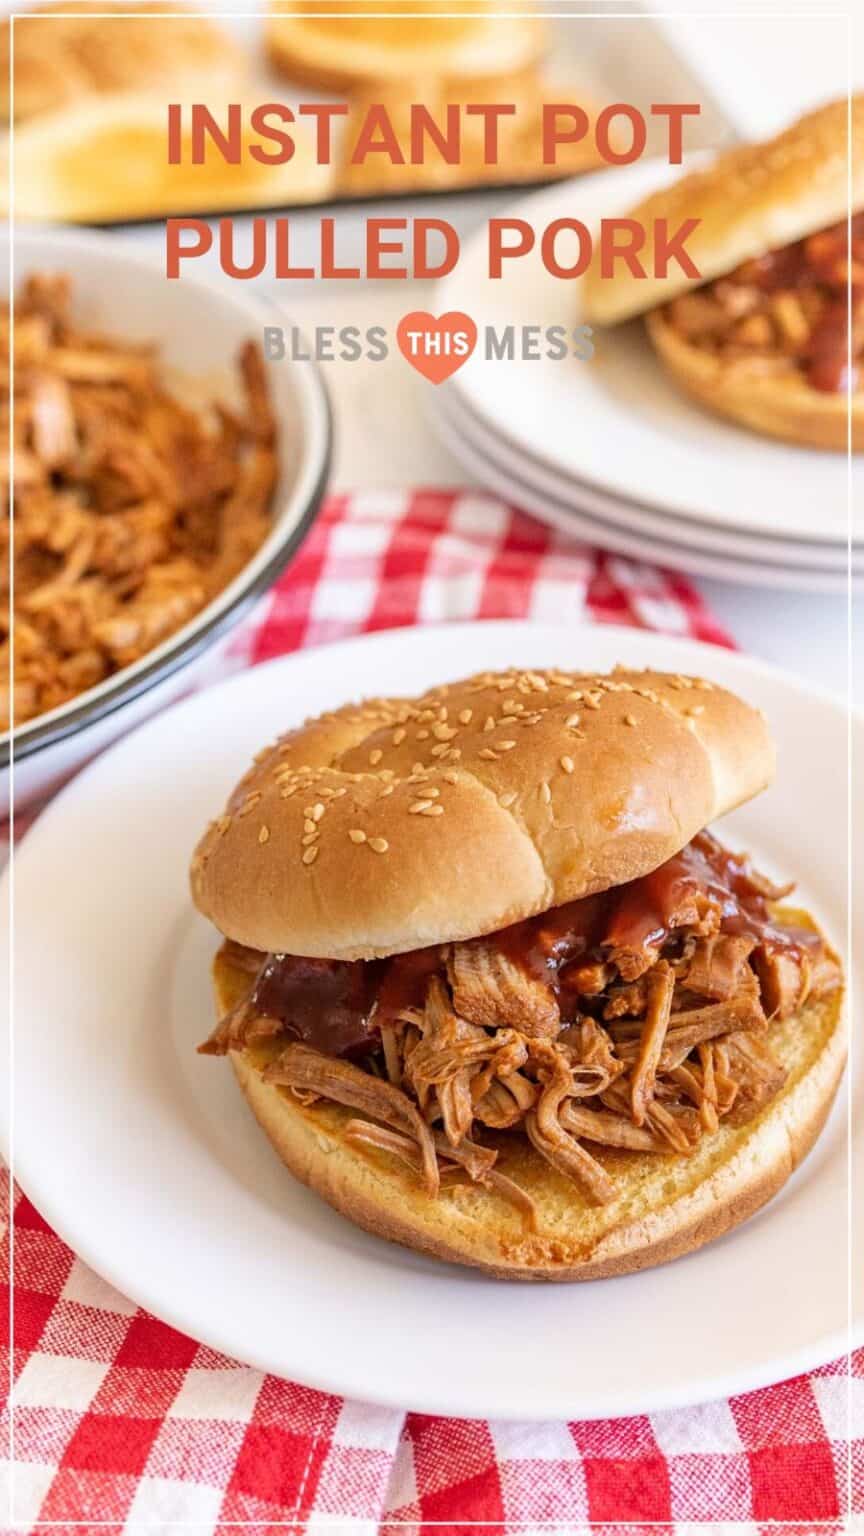 Instant Pot Pulled Pork Recipe - Perfect for Pulled Pork Sandwiches!